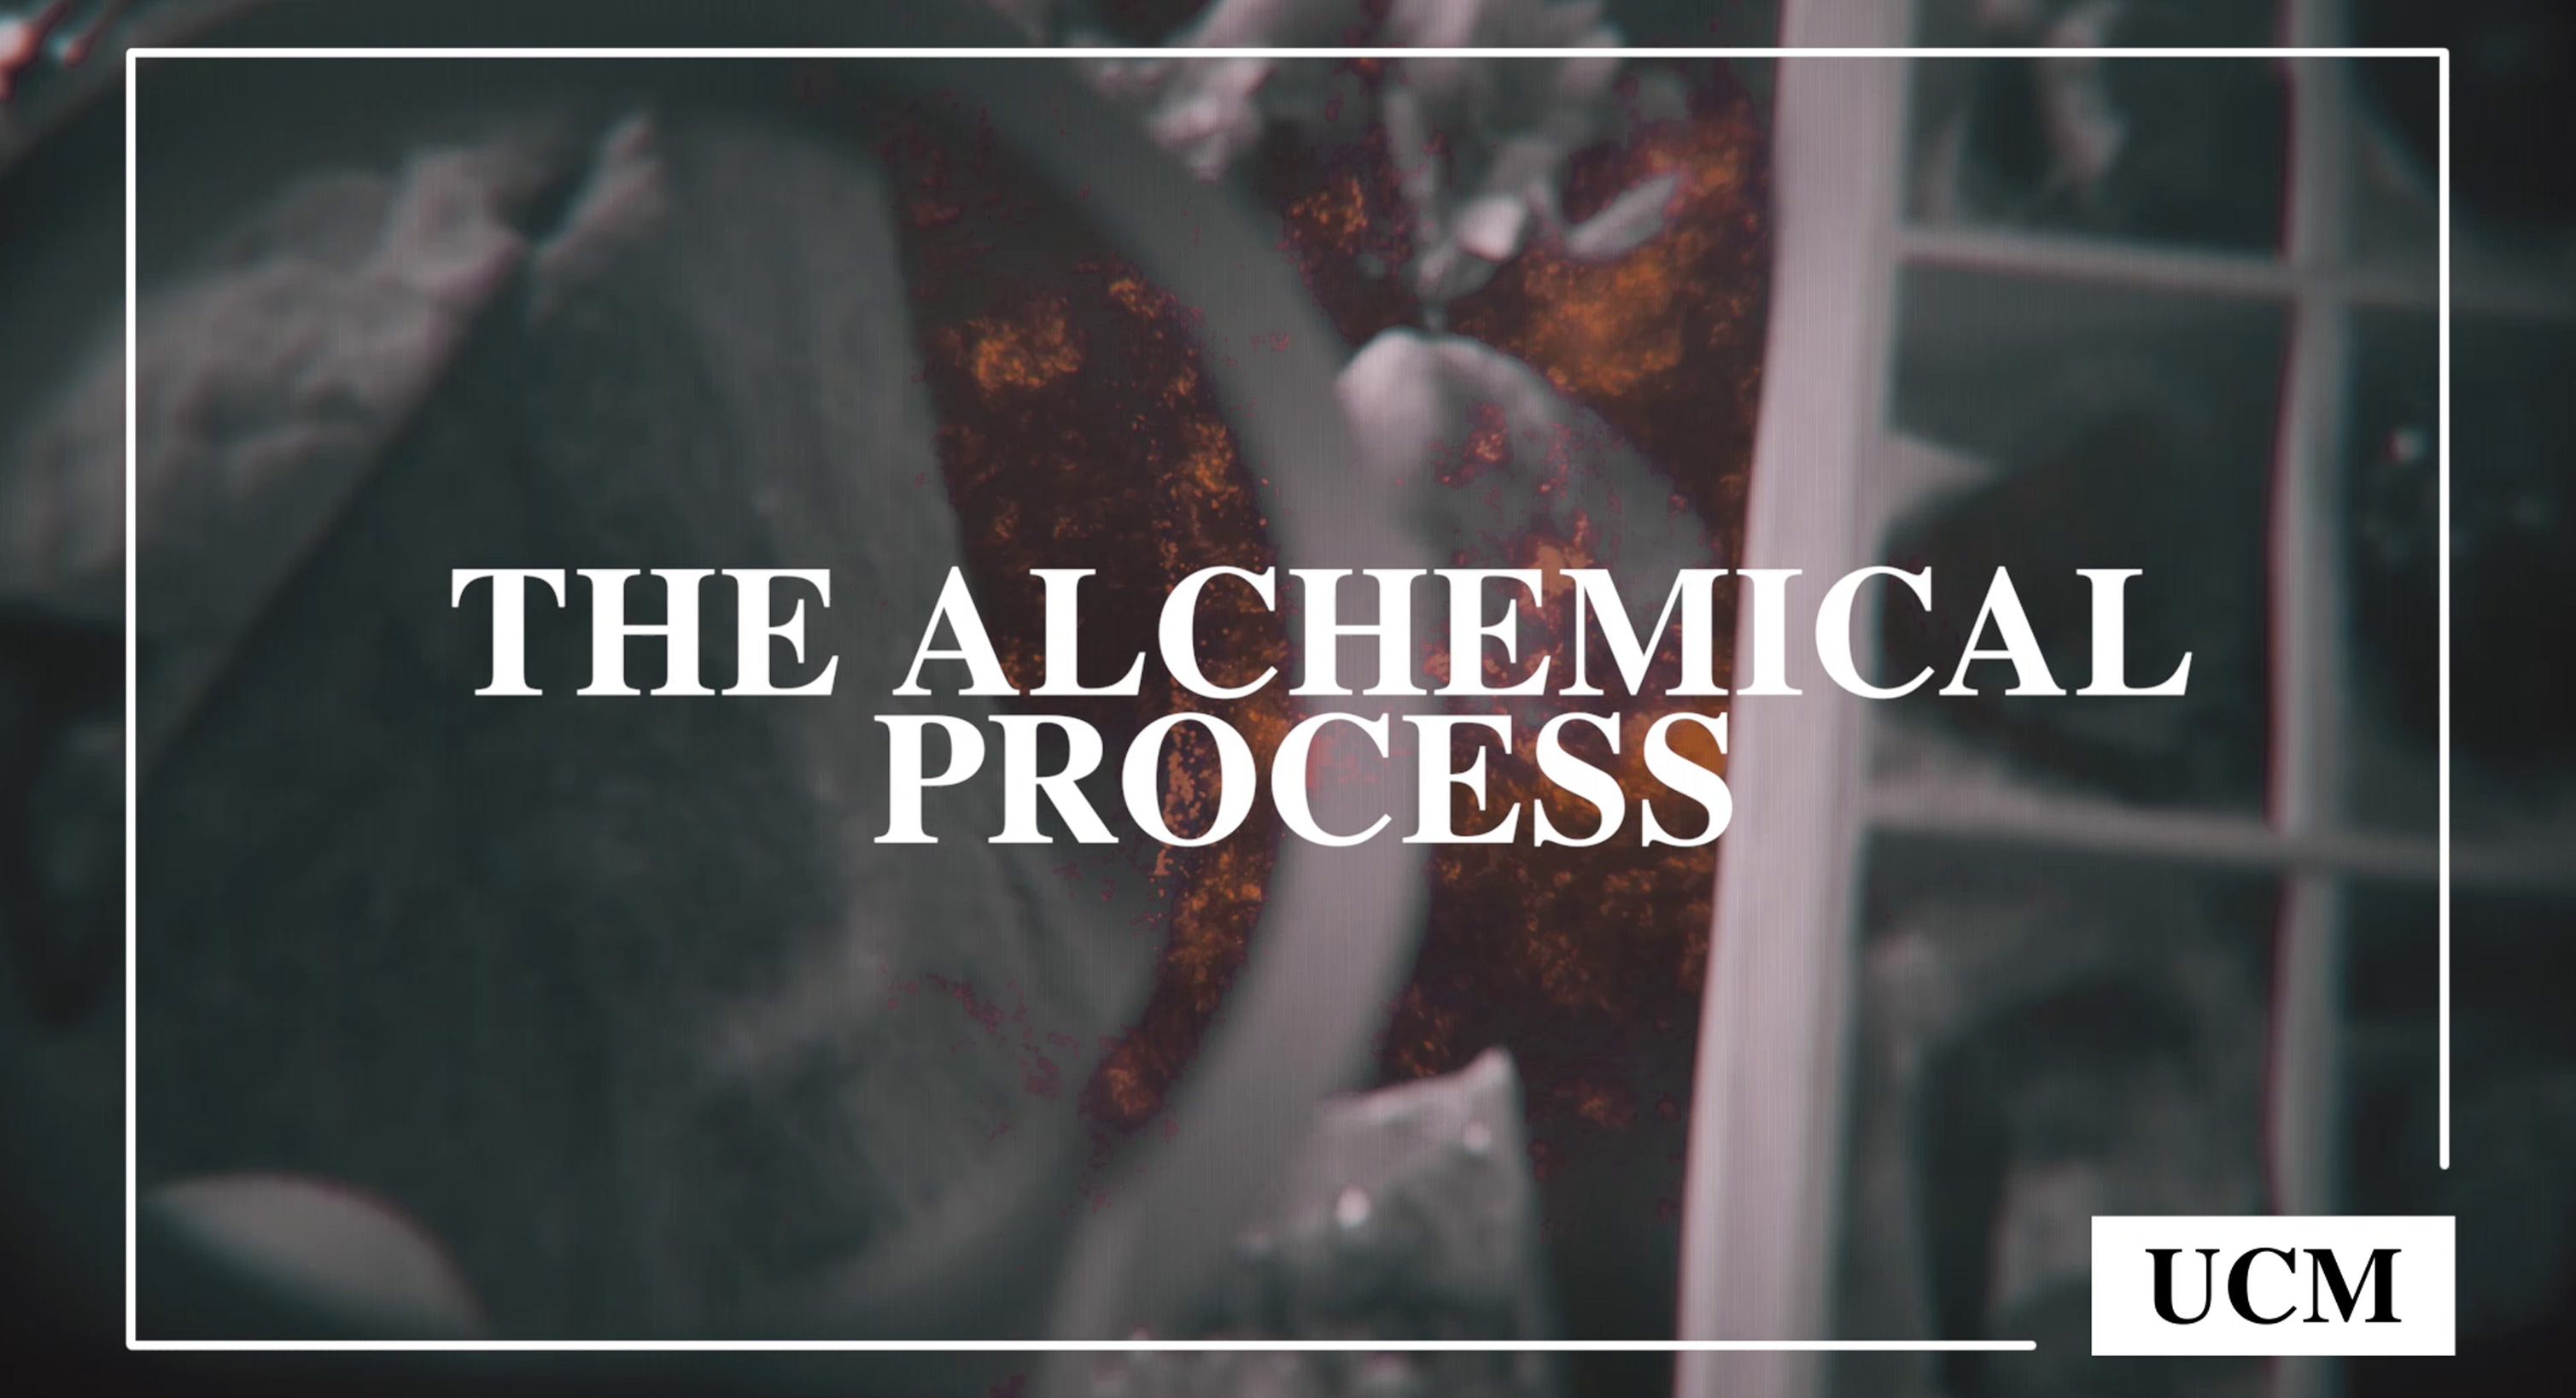 The Alchemical Process